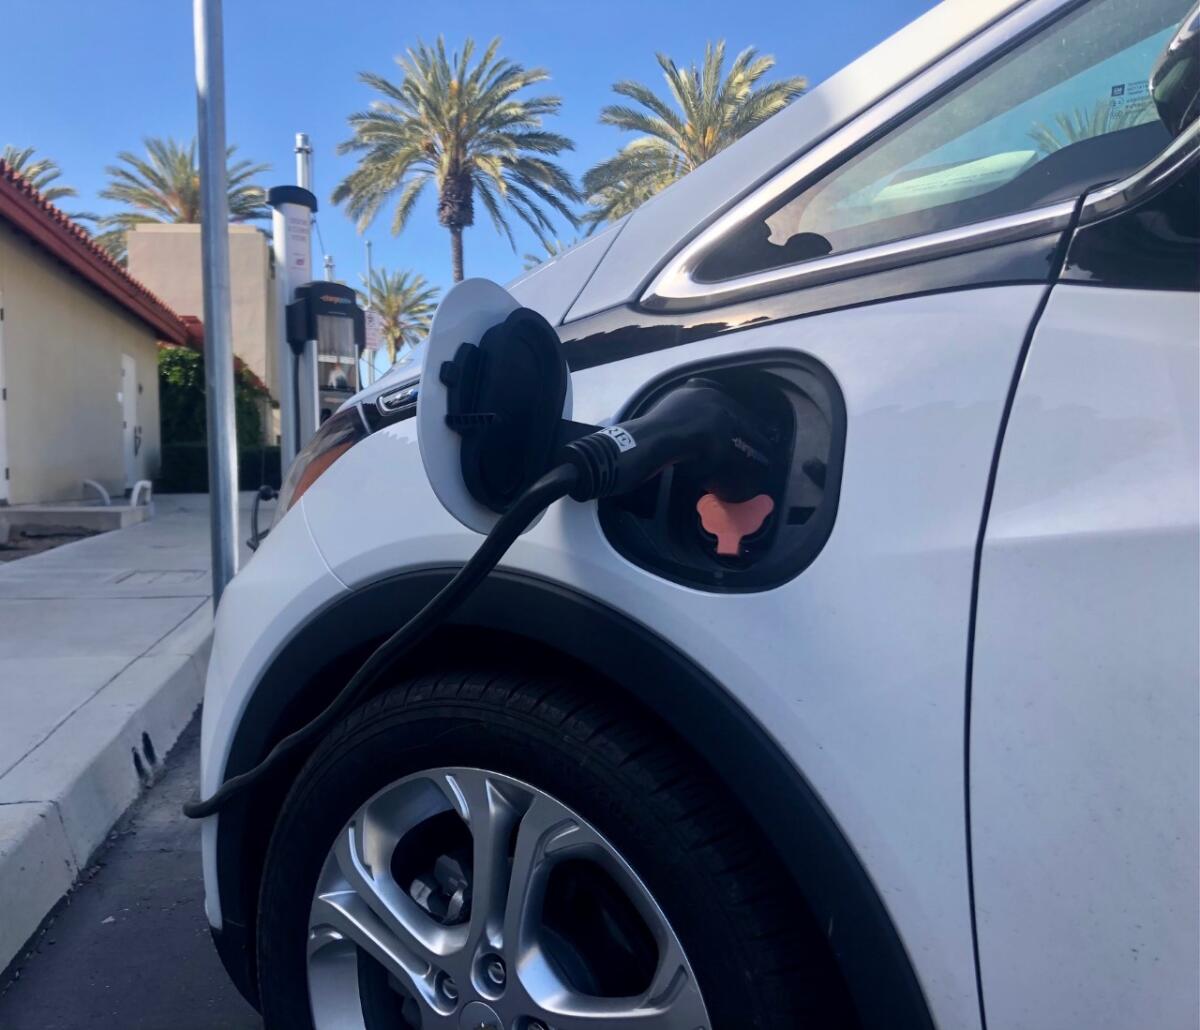 A Chevy Bolt charging in Chula Vista.